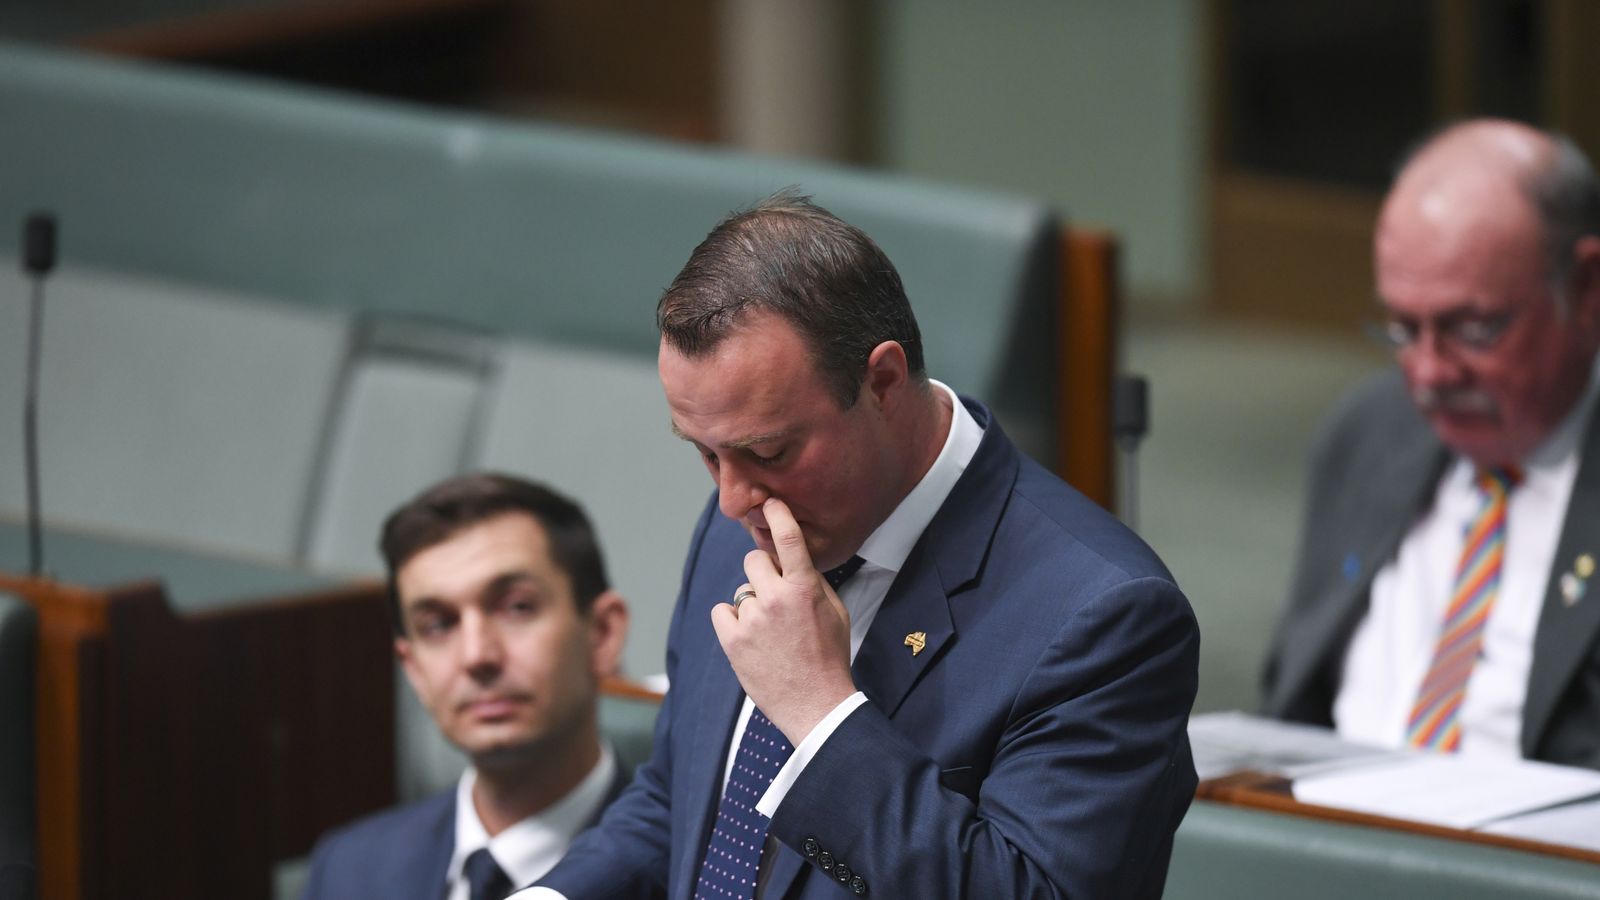 Mp Proposes To Gay Partner In Australian Parliament During